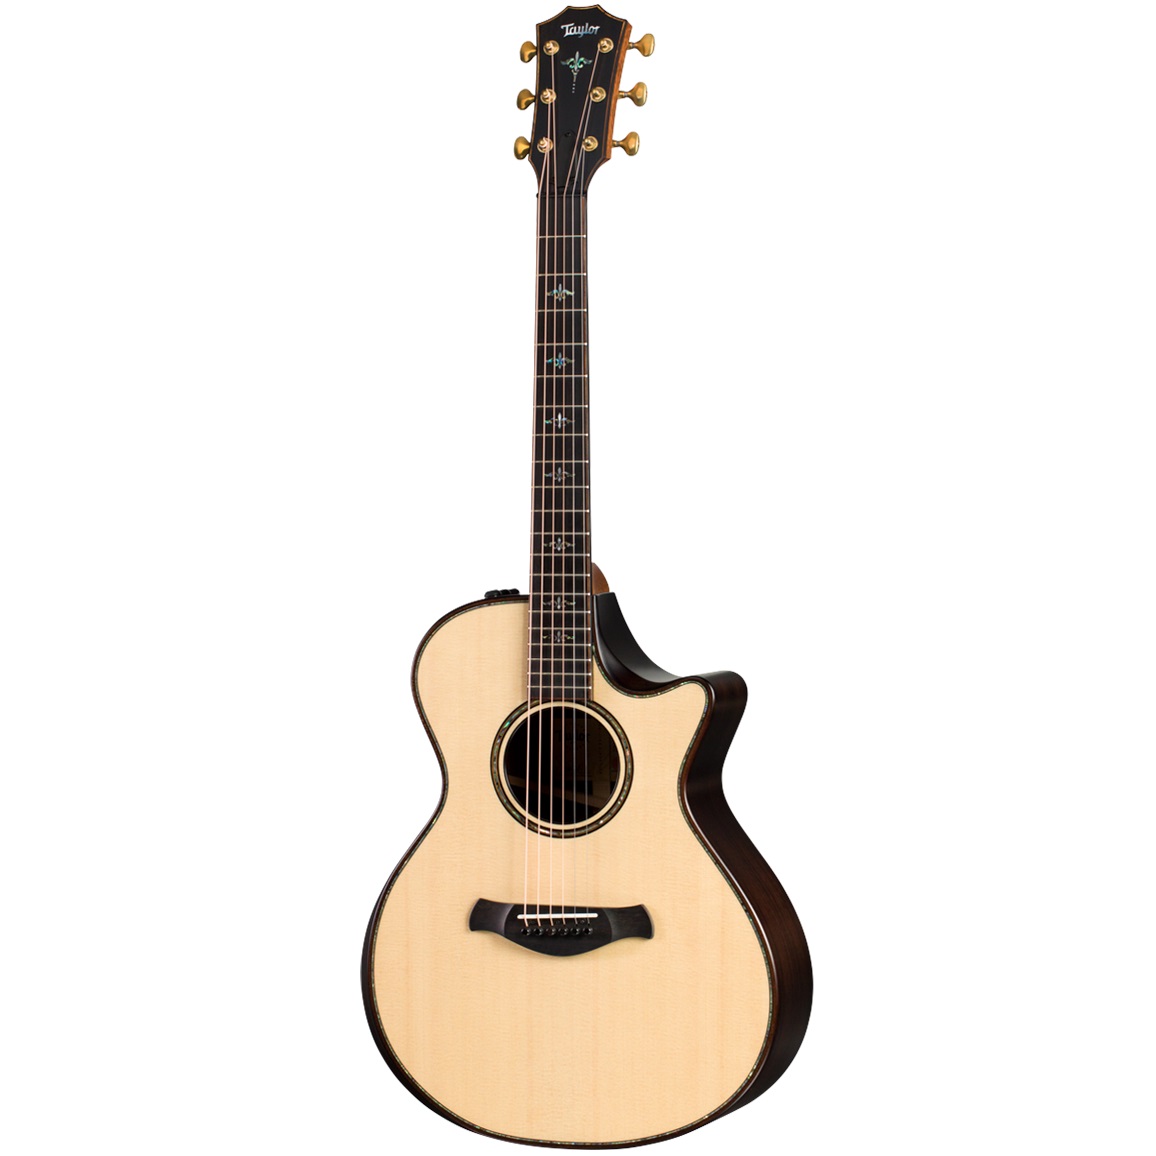 Taylor Builder's Edition V-Class 912ce Grand Concert Acoustic-Electric Guitar